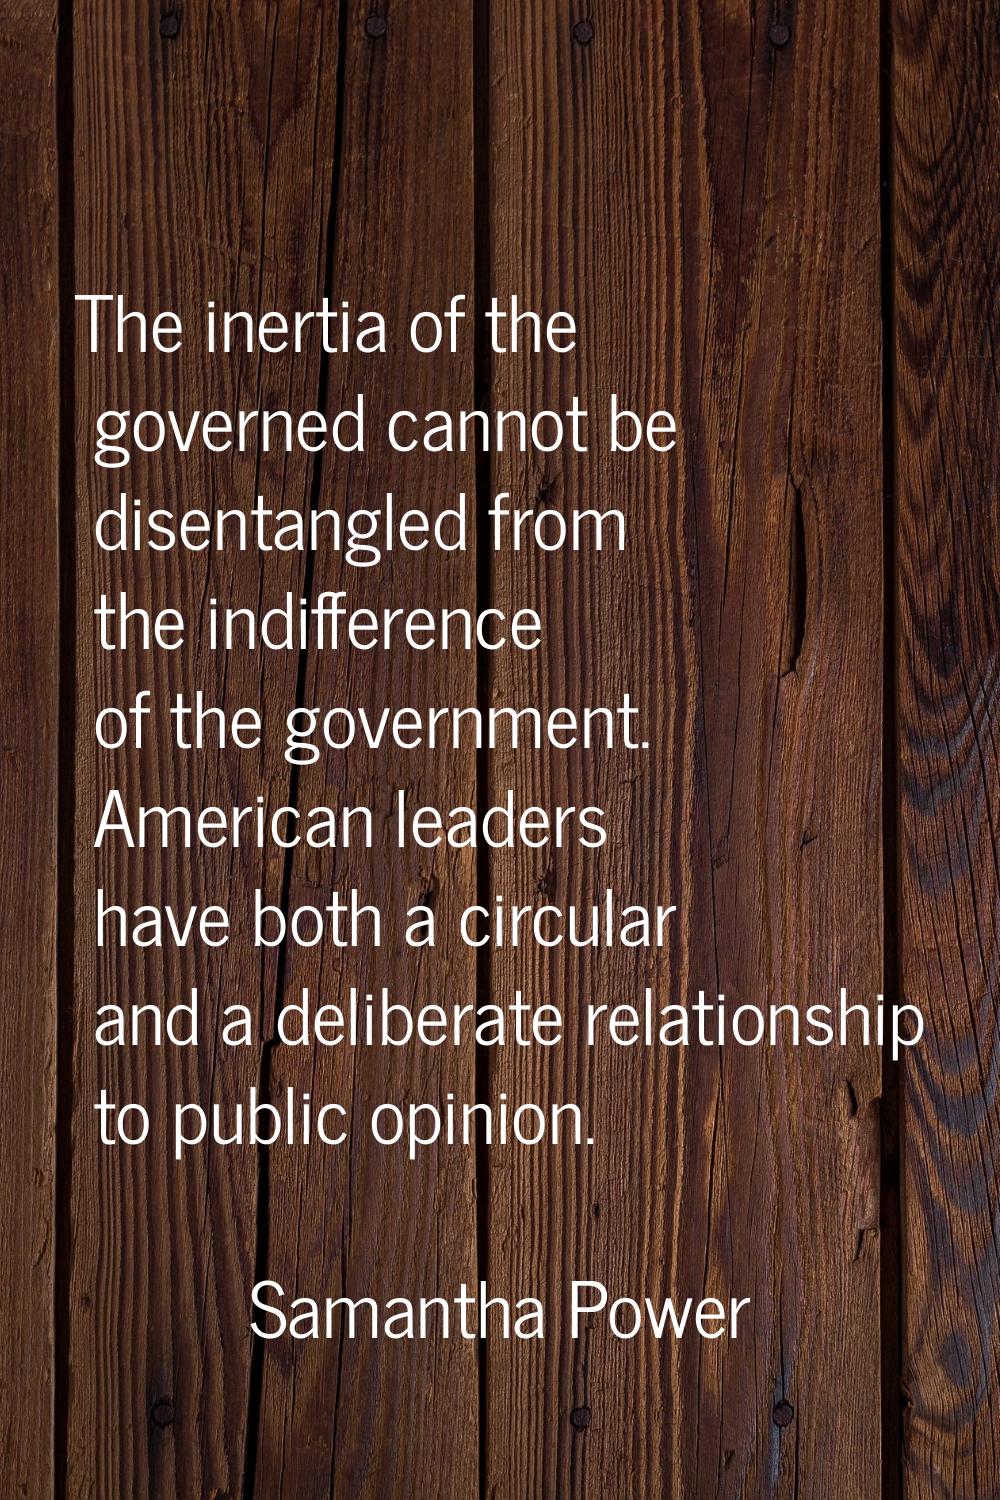 The inertia of the governed cannot be disentangled from the indifference of the government. America